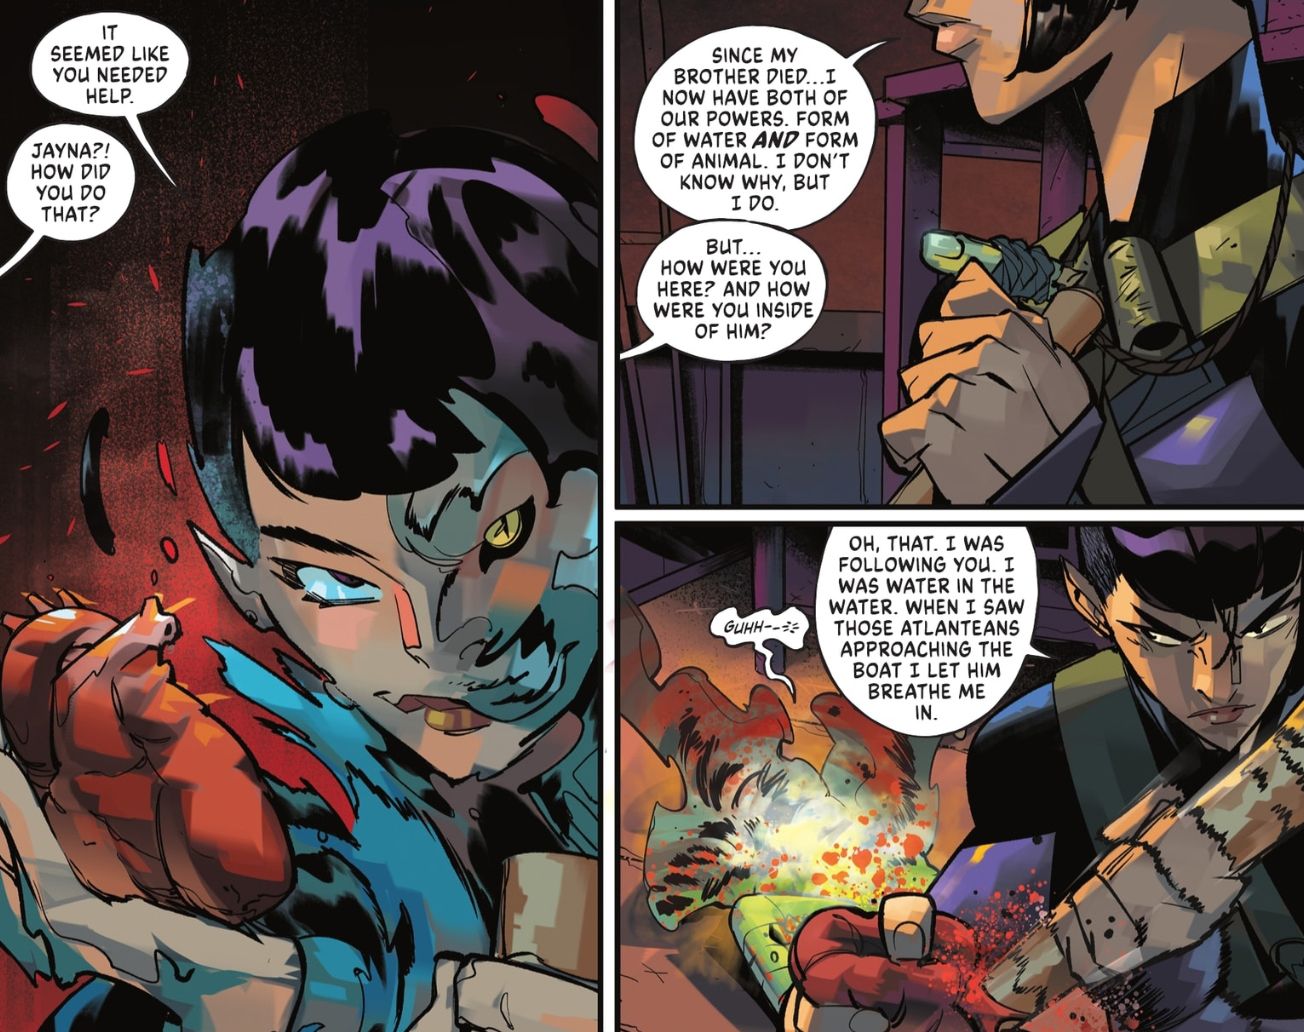 Wonder Twin Jayna reveals that she can now become water versions of animals in DC vs. Vampires #8. in 